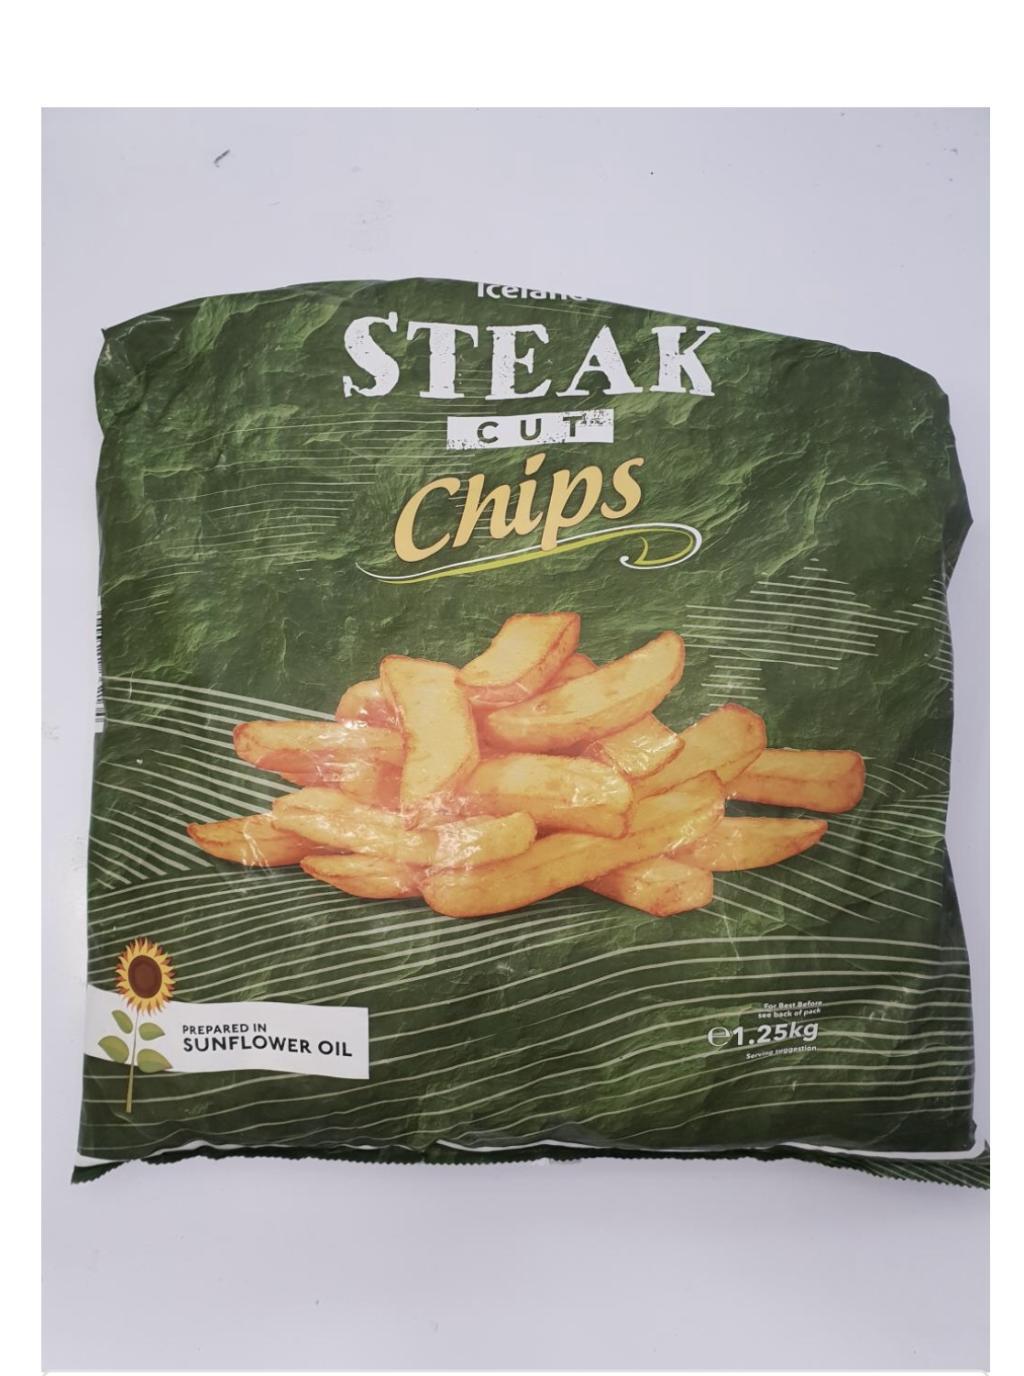 ICELAND STRAIGHT CUT CHIPS 1.25KG